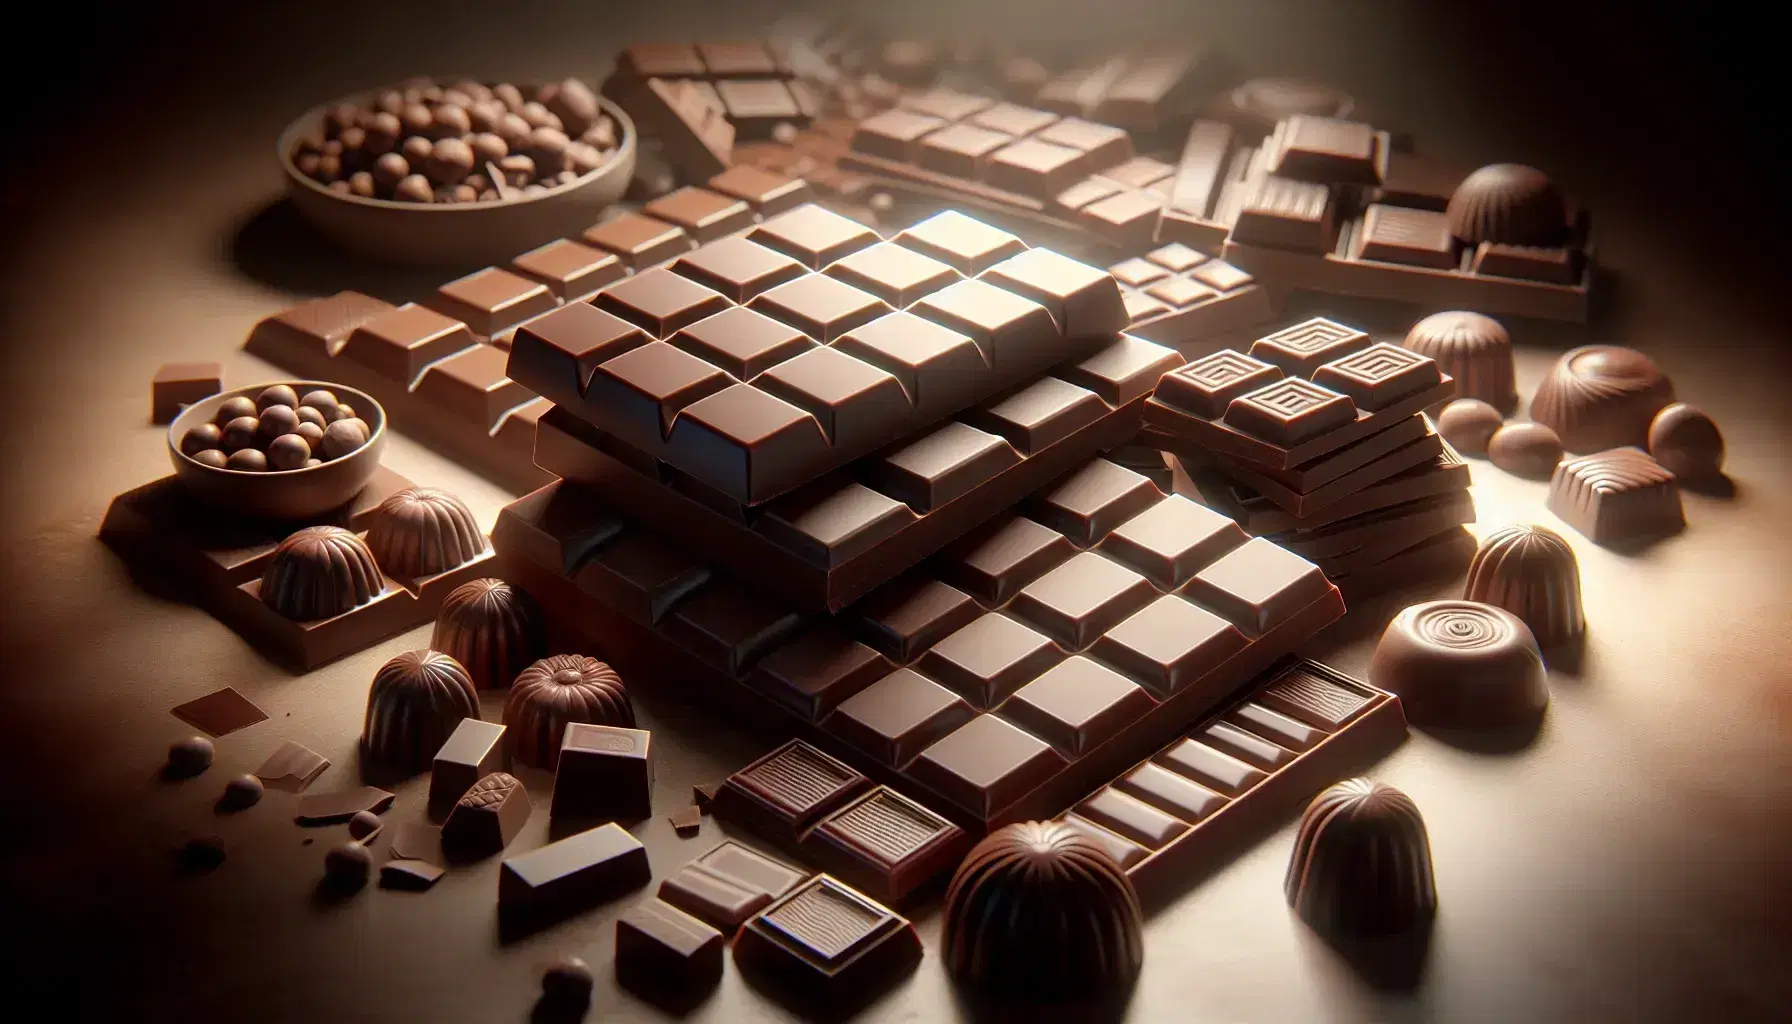 Assorted chocolate bars and pieces with glossy surfaces and segmented designs, in shades of brown, arranged on a neutral backdrop.